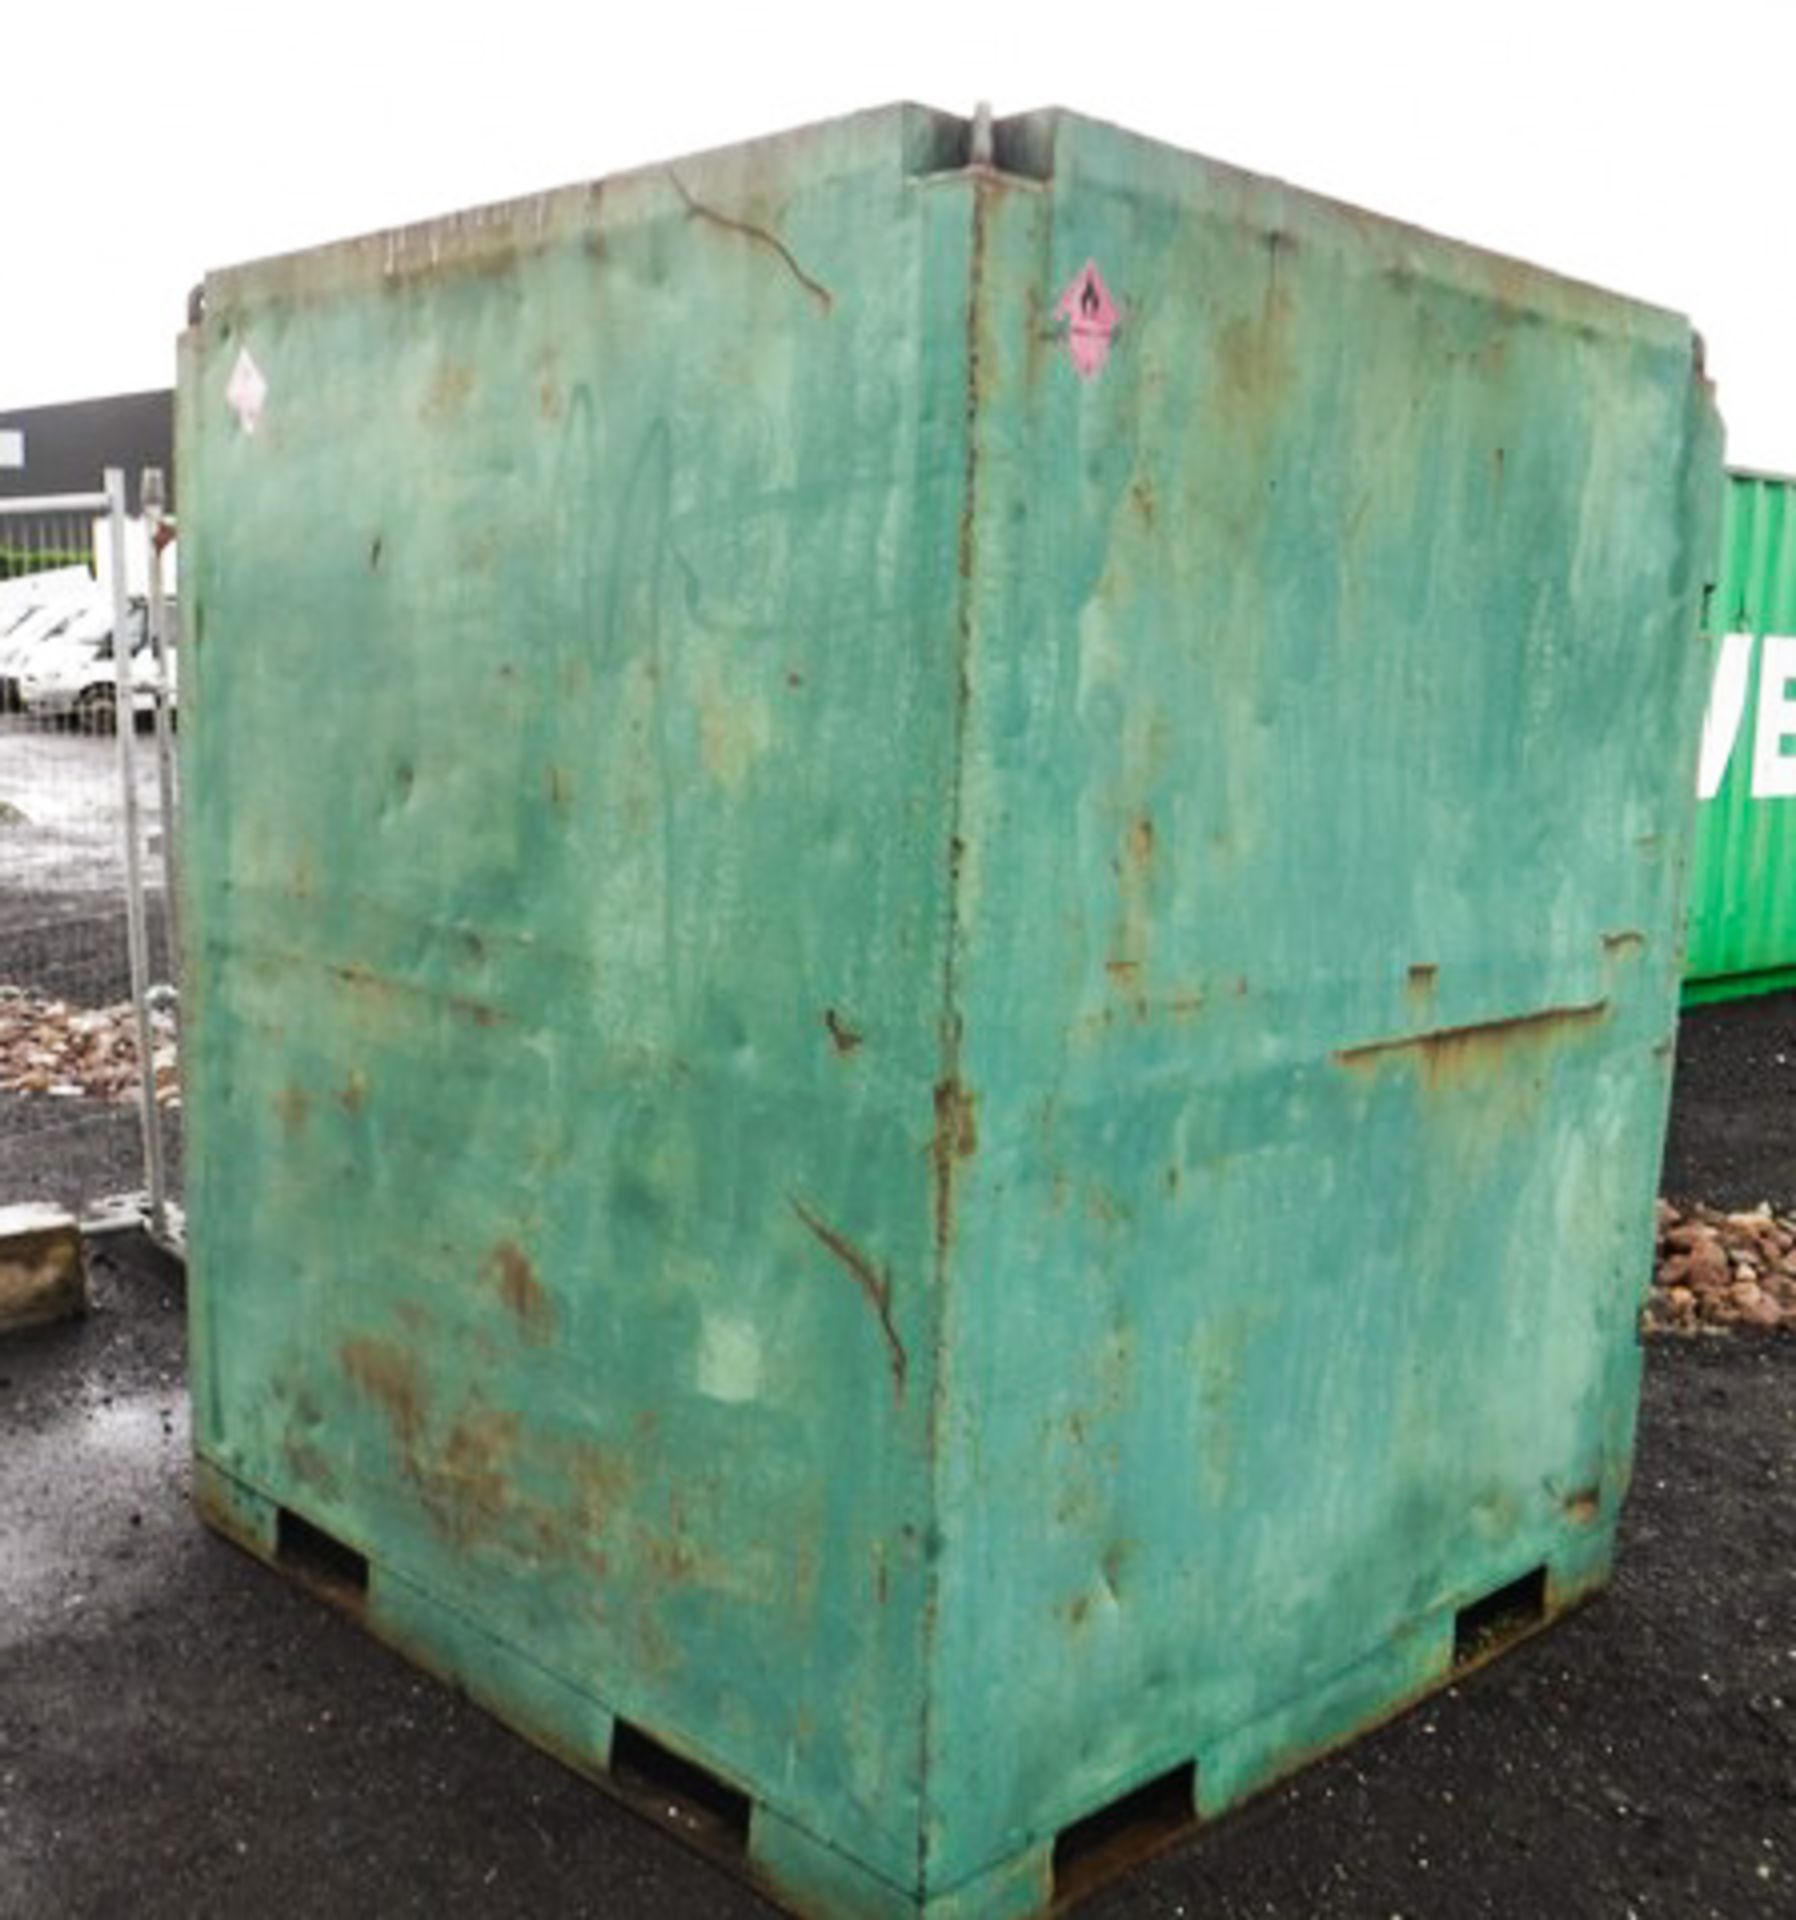 7FT X 6FT SECURE CONTAINER C/W 2000L BUNDED DIESEL TANK, HAND PUMP, METER & DISCHARGE NOZZLE - Image 2 of 5